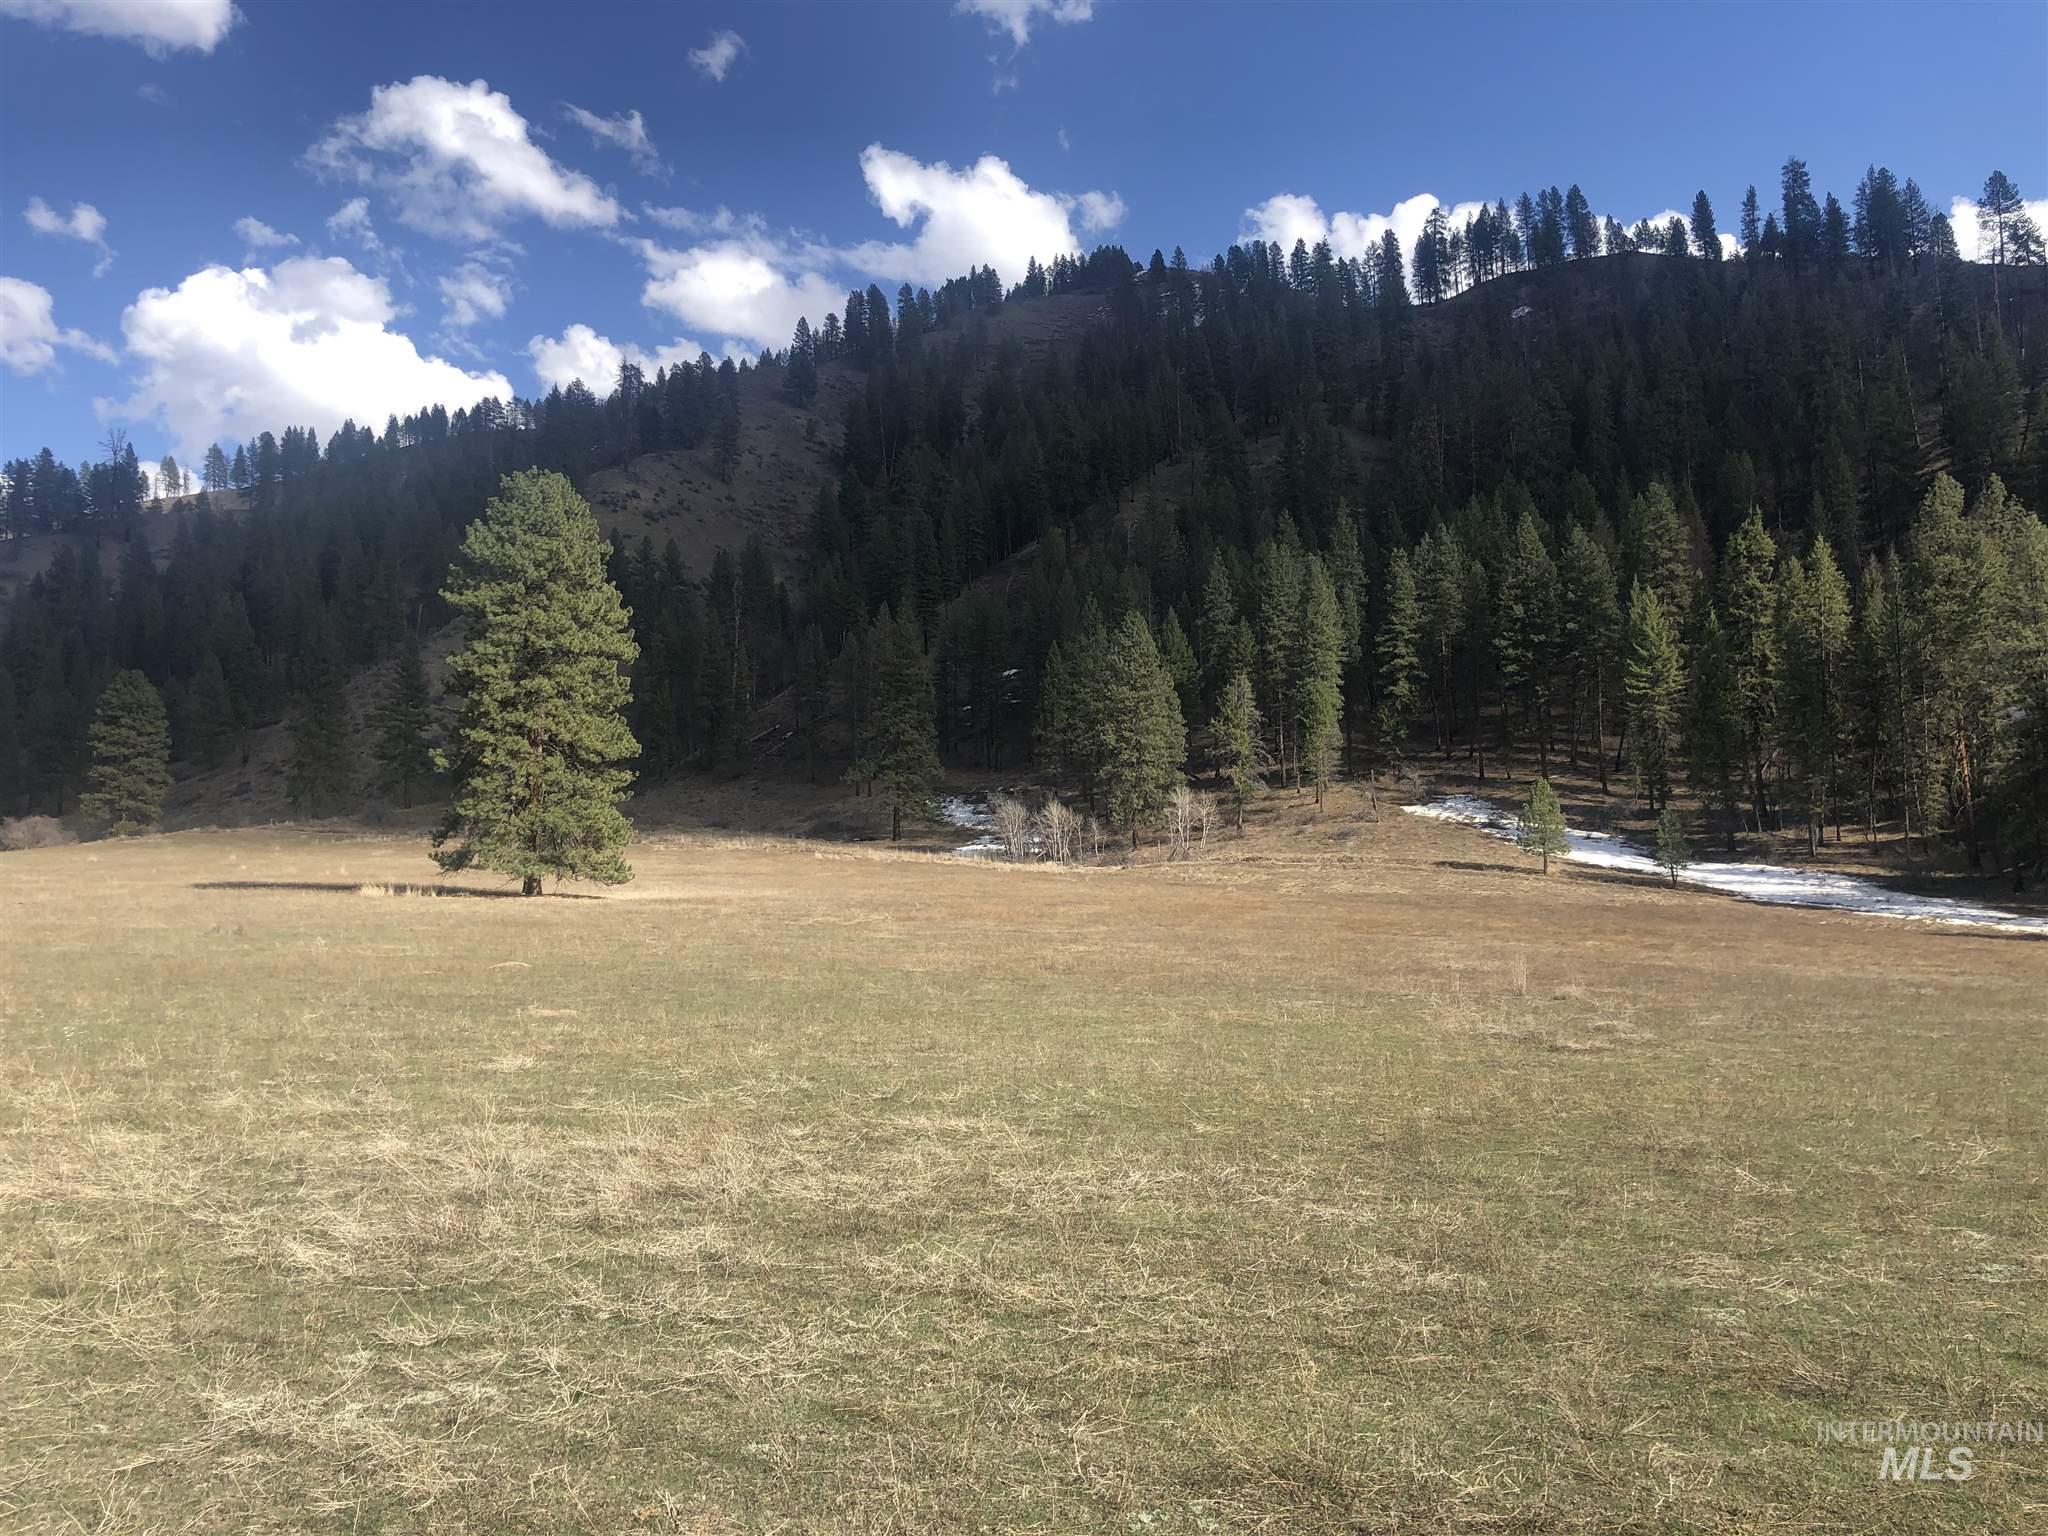 TBD Blk 1 Lot 5 Payette River Heights, Garden Valley, Idaho 83622, Land For Sale, Price $165,000,MLS 98909512